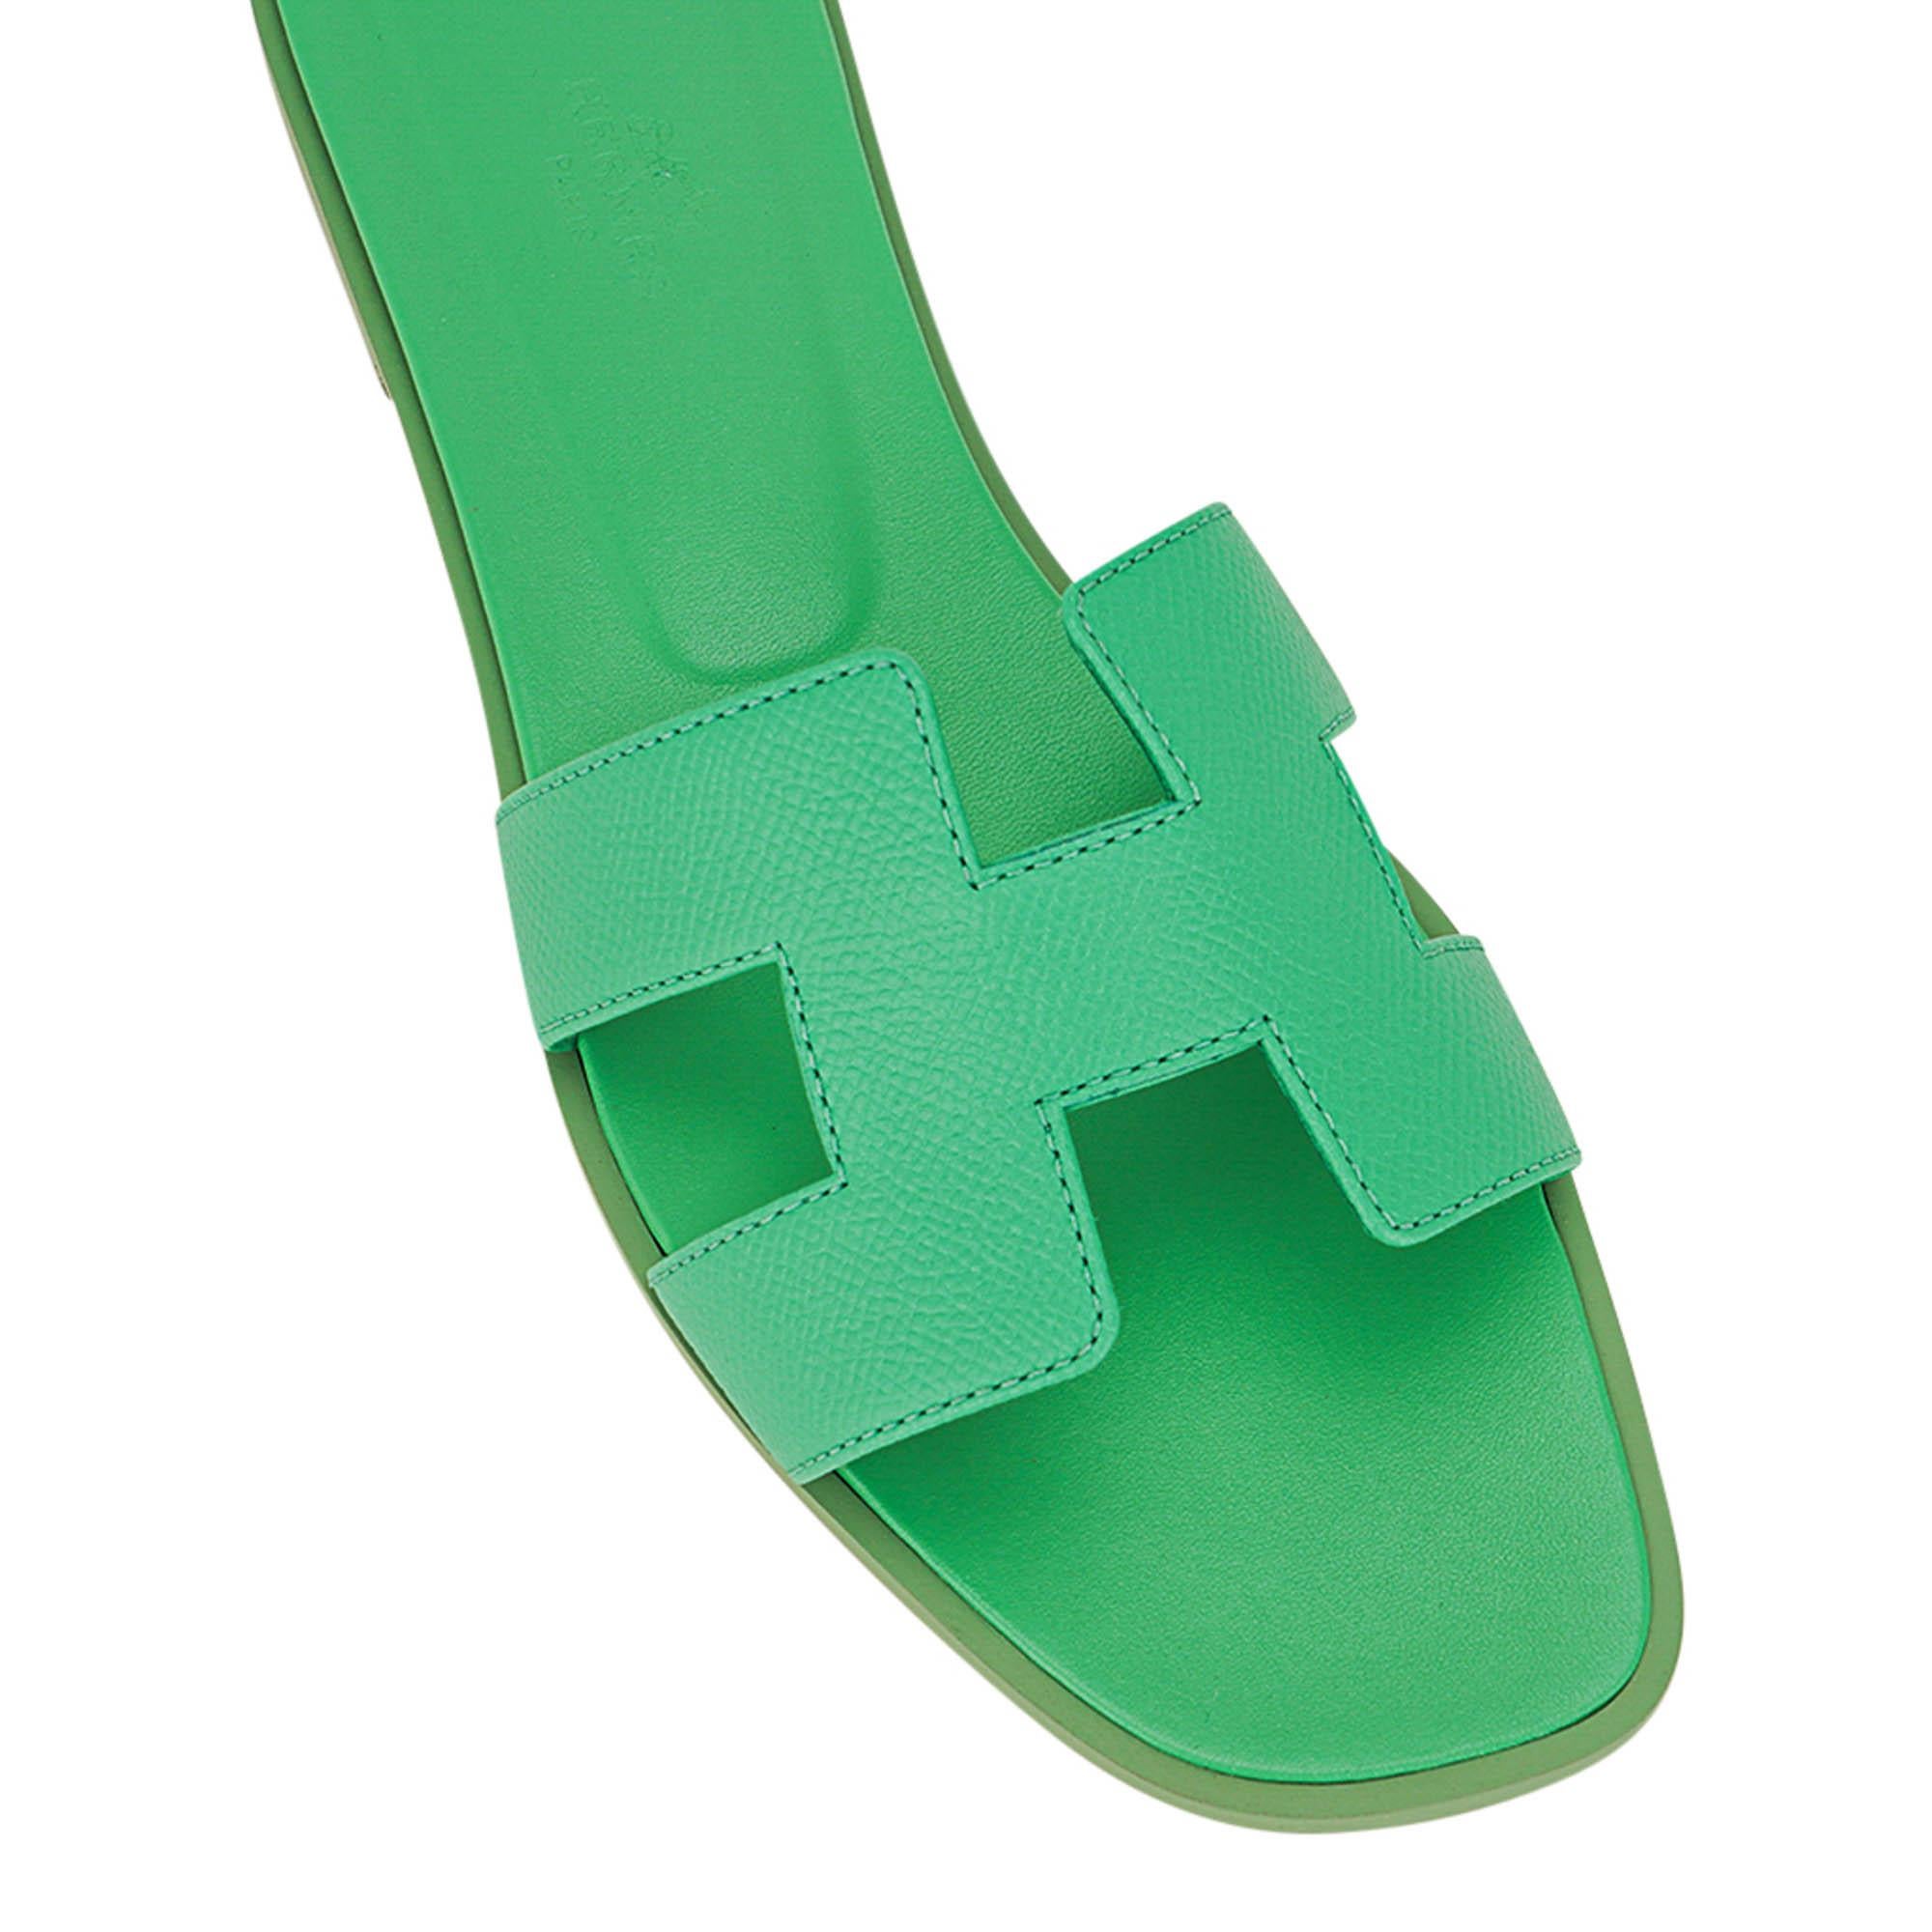 Mightychic offers Hermes Oran flat sandals featured in Vert Pomme.
This fresh green Hermes Oran slide sandal is like a cool breeze on a summer day.
The iconic H cutout over the top of the foot.
Matching embossed calfskin insole.
Wood heel with